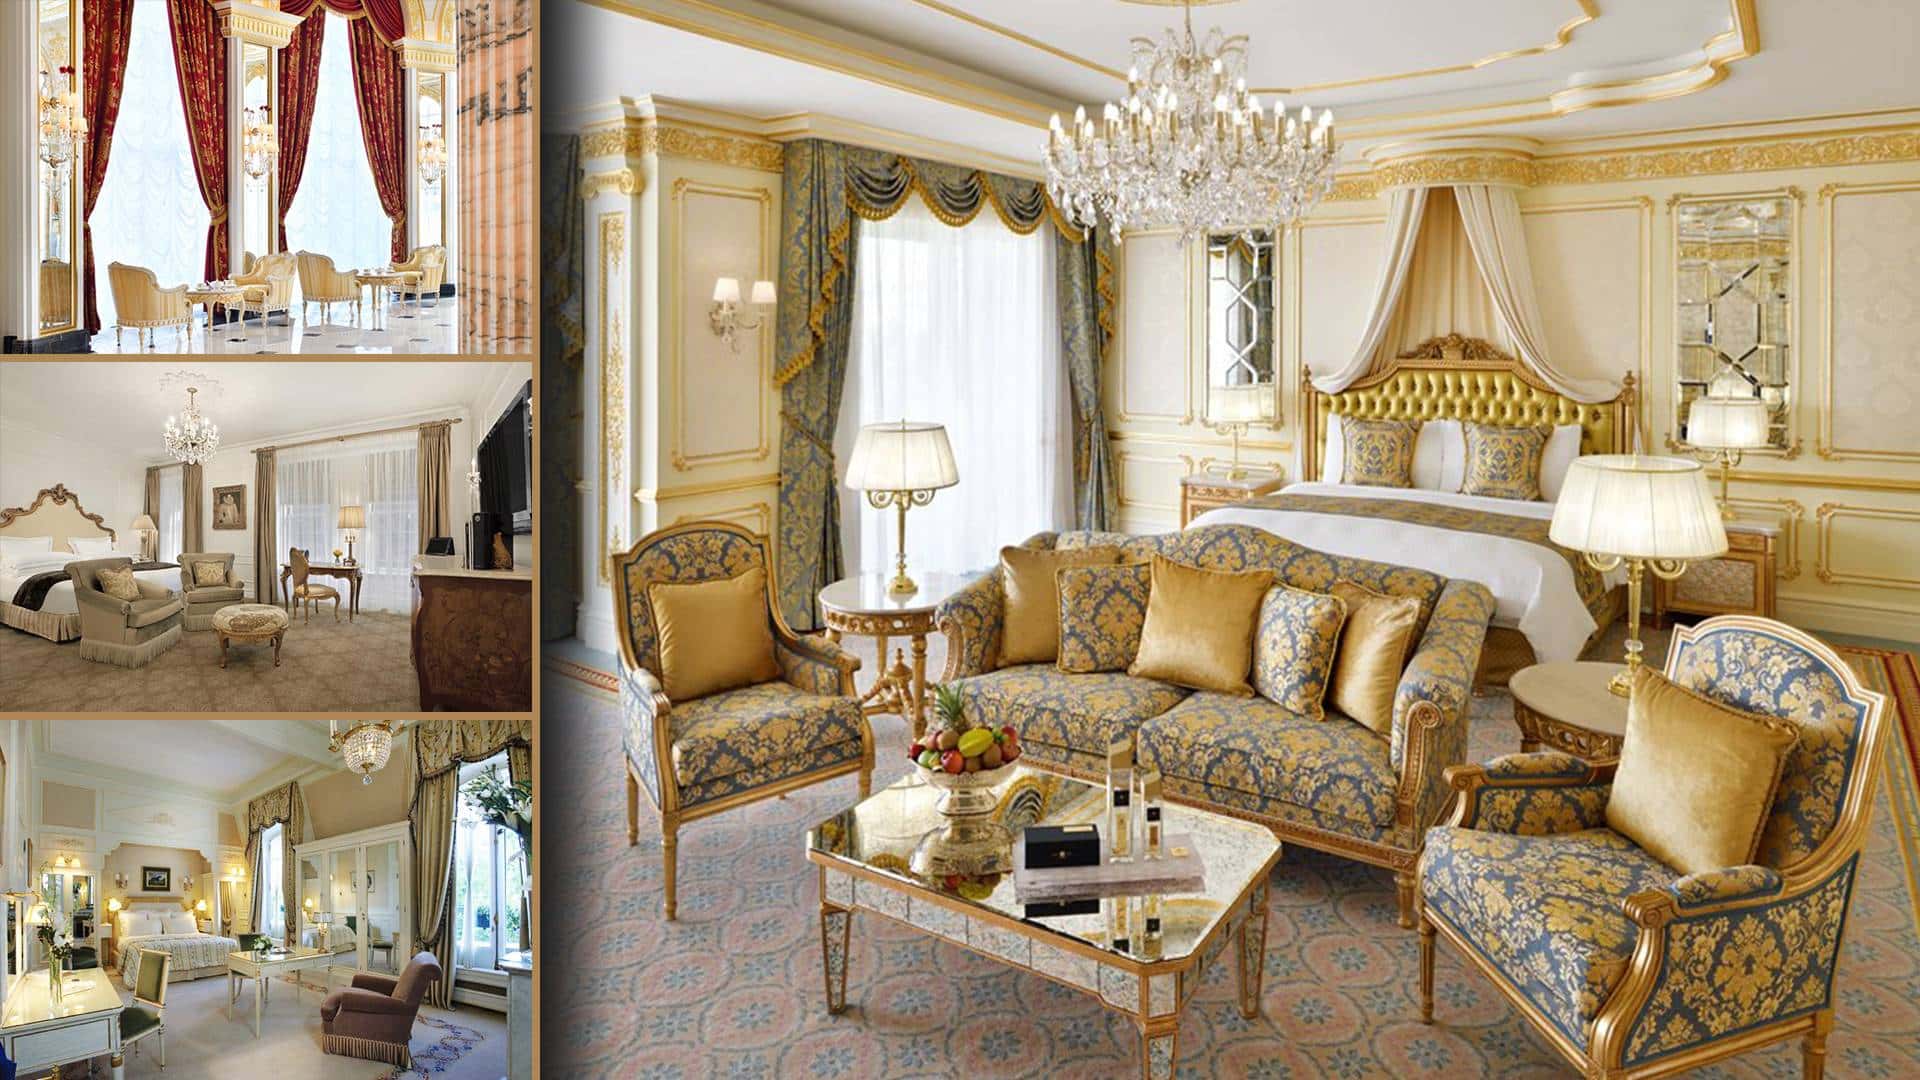 hotels furniture selection interior design service consult luxury classic classy suites royal traditional victorian baroque rococo' hotel rooms